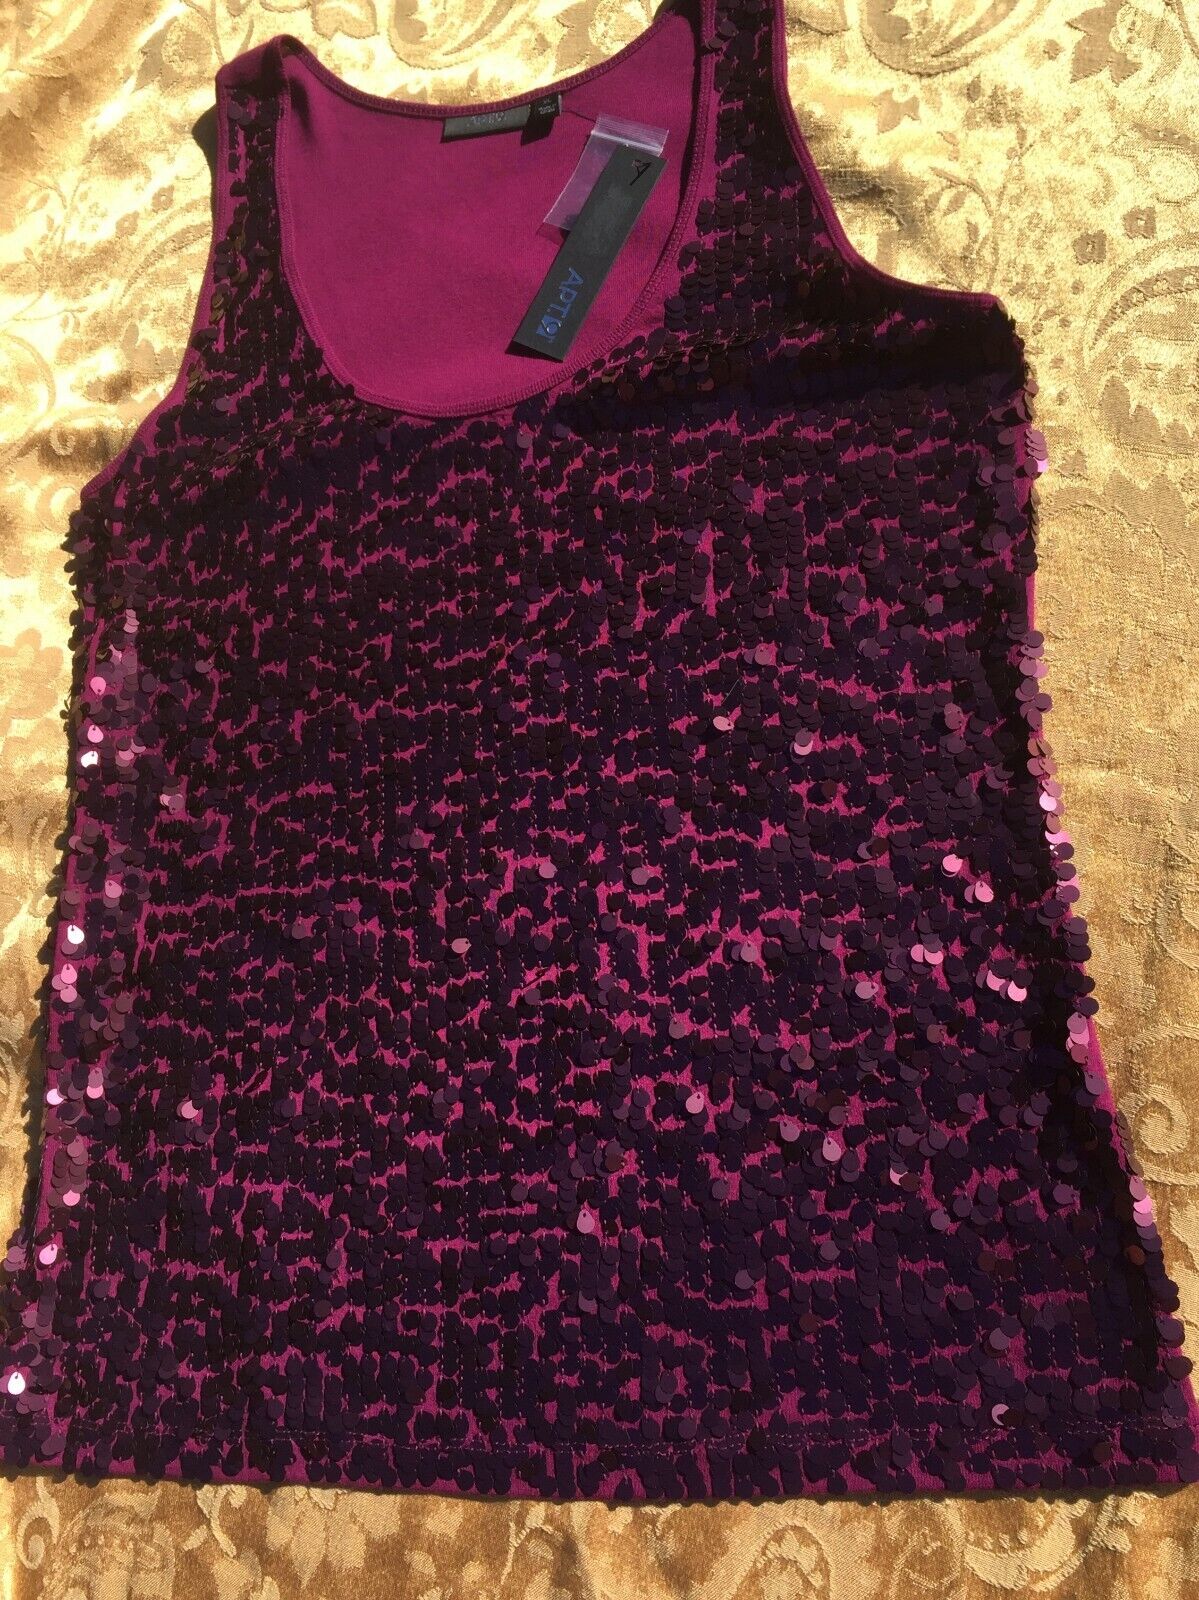 APT 9 SEQUIN BLOUSE TOP DEEP PURPLE SIZE XL SEXY VALENTINE TOP -LADY WOMAN TEEN